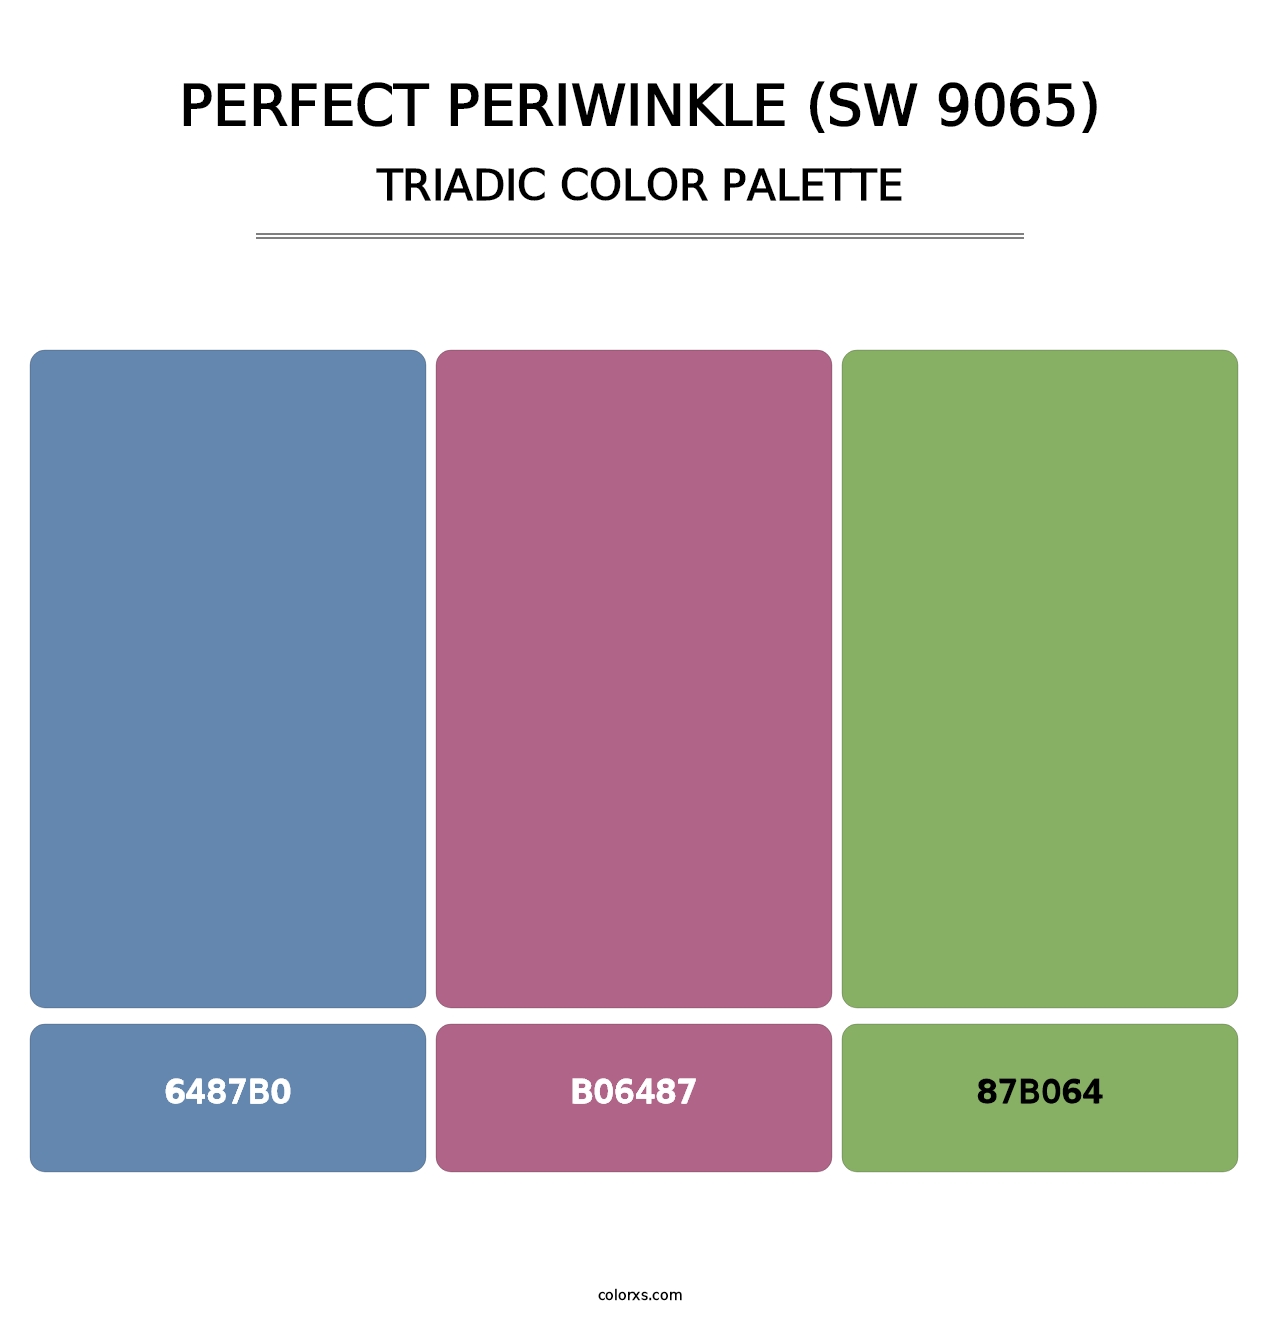 Perfect Periwinkle (SW 9065) - Triadic Color Palette